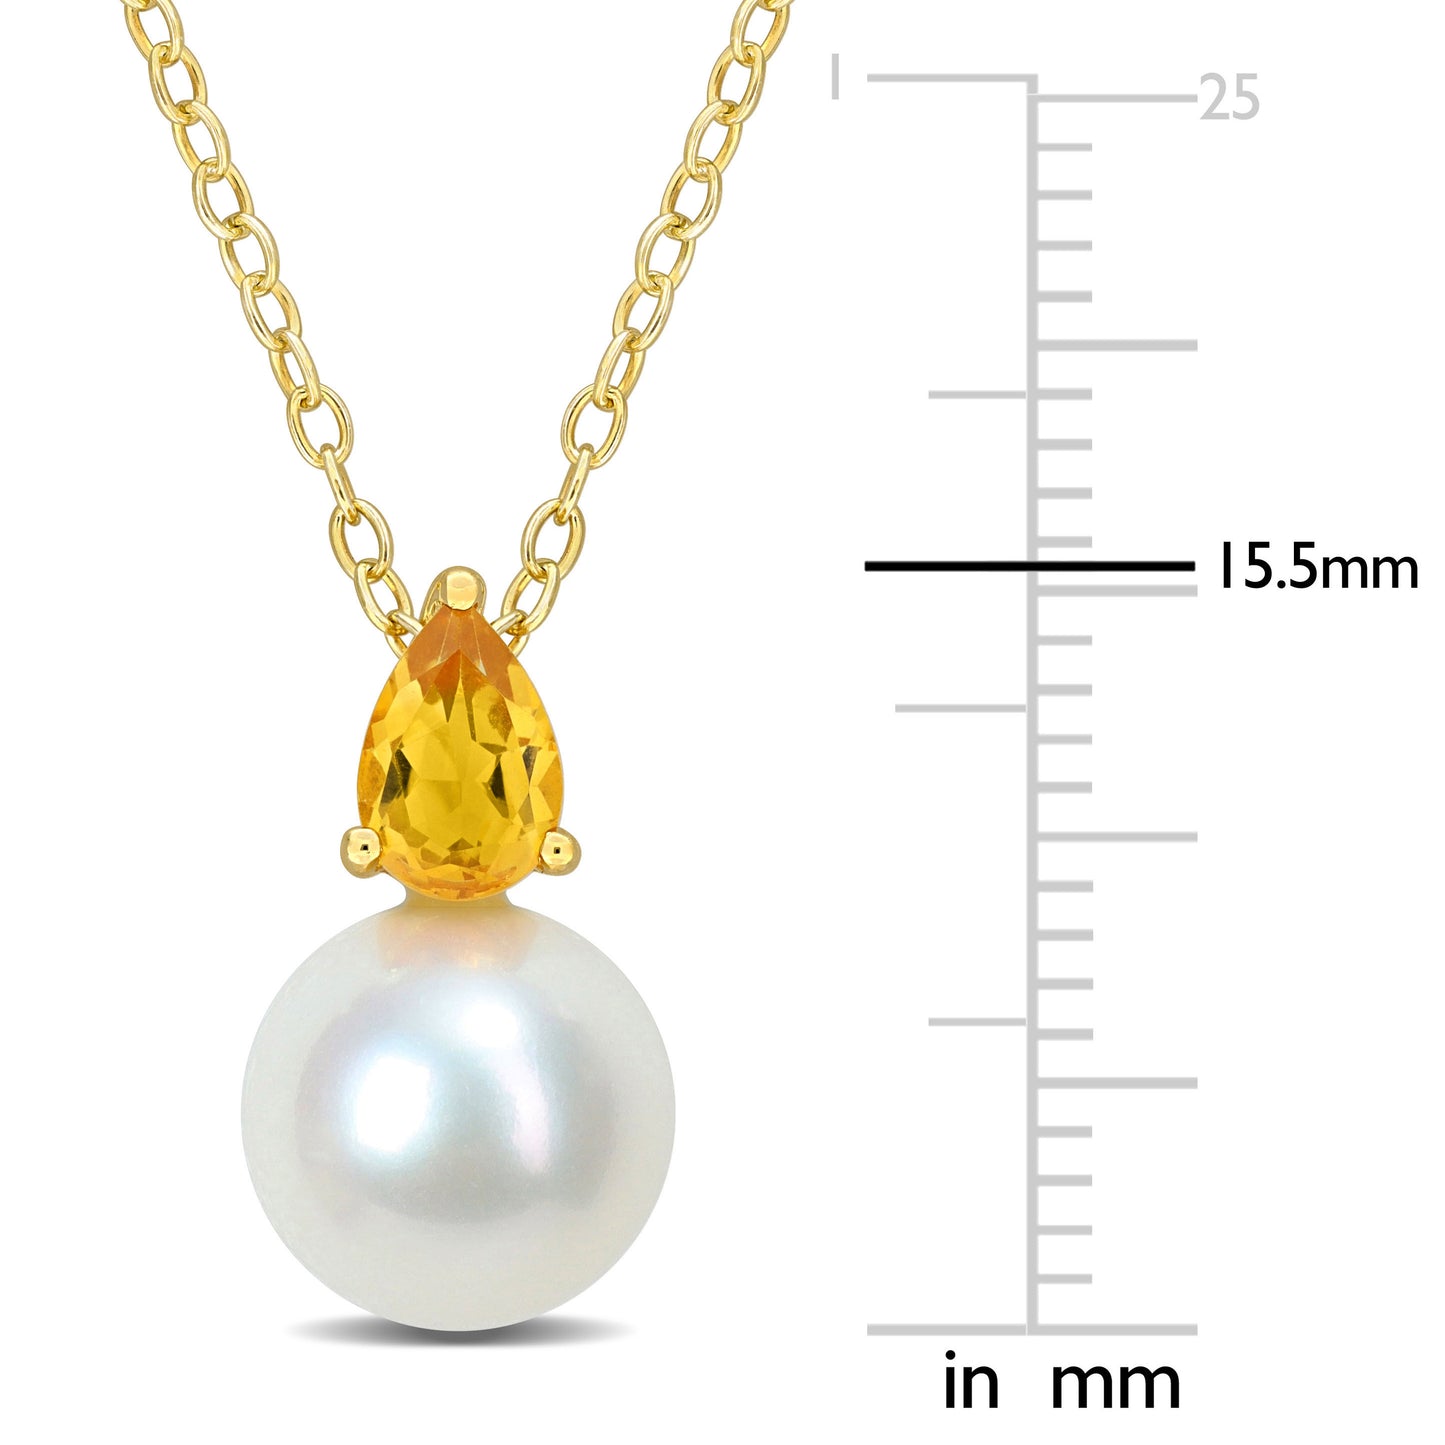 0.45 CT TGW Citrine And 8.5 - 9 MM White Freshwater Cultured Pearl Fashion Pendant With Chain Yellow Silver